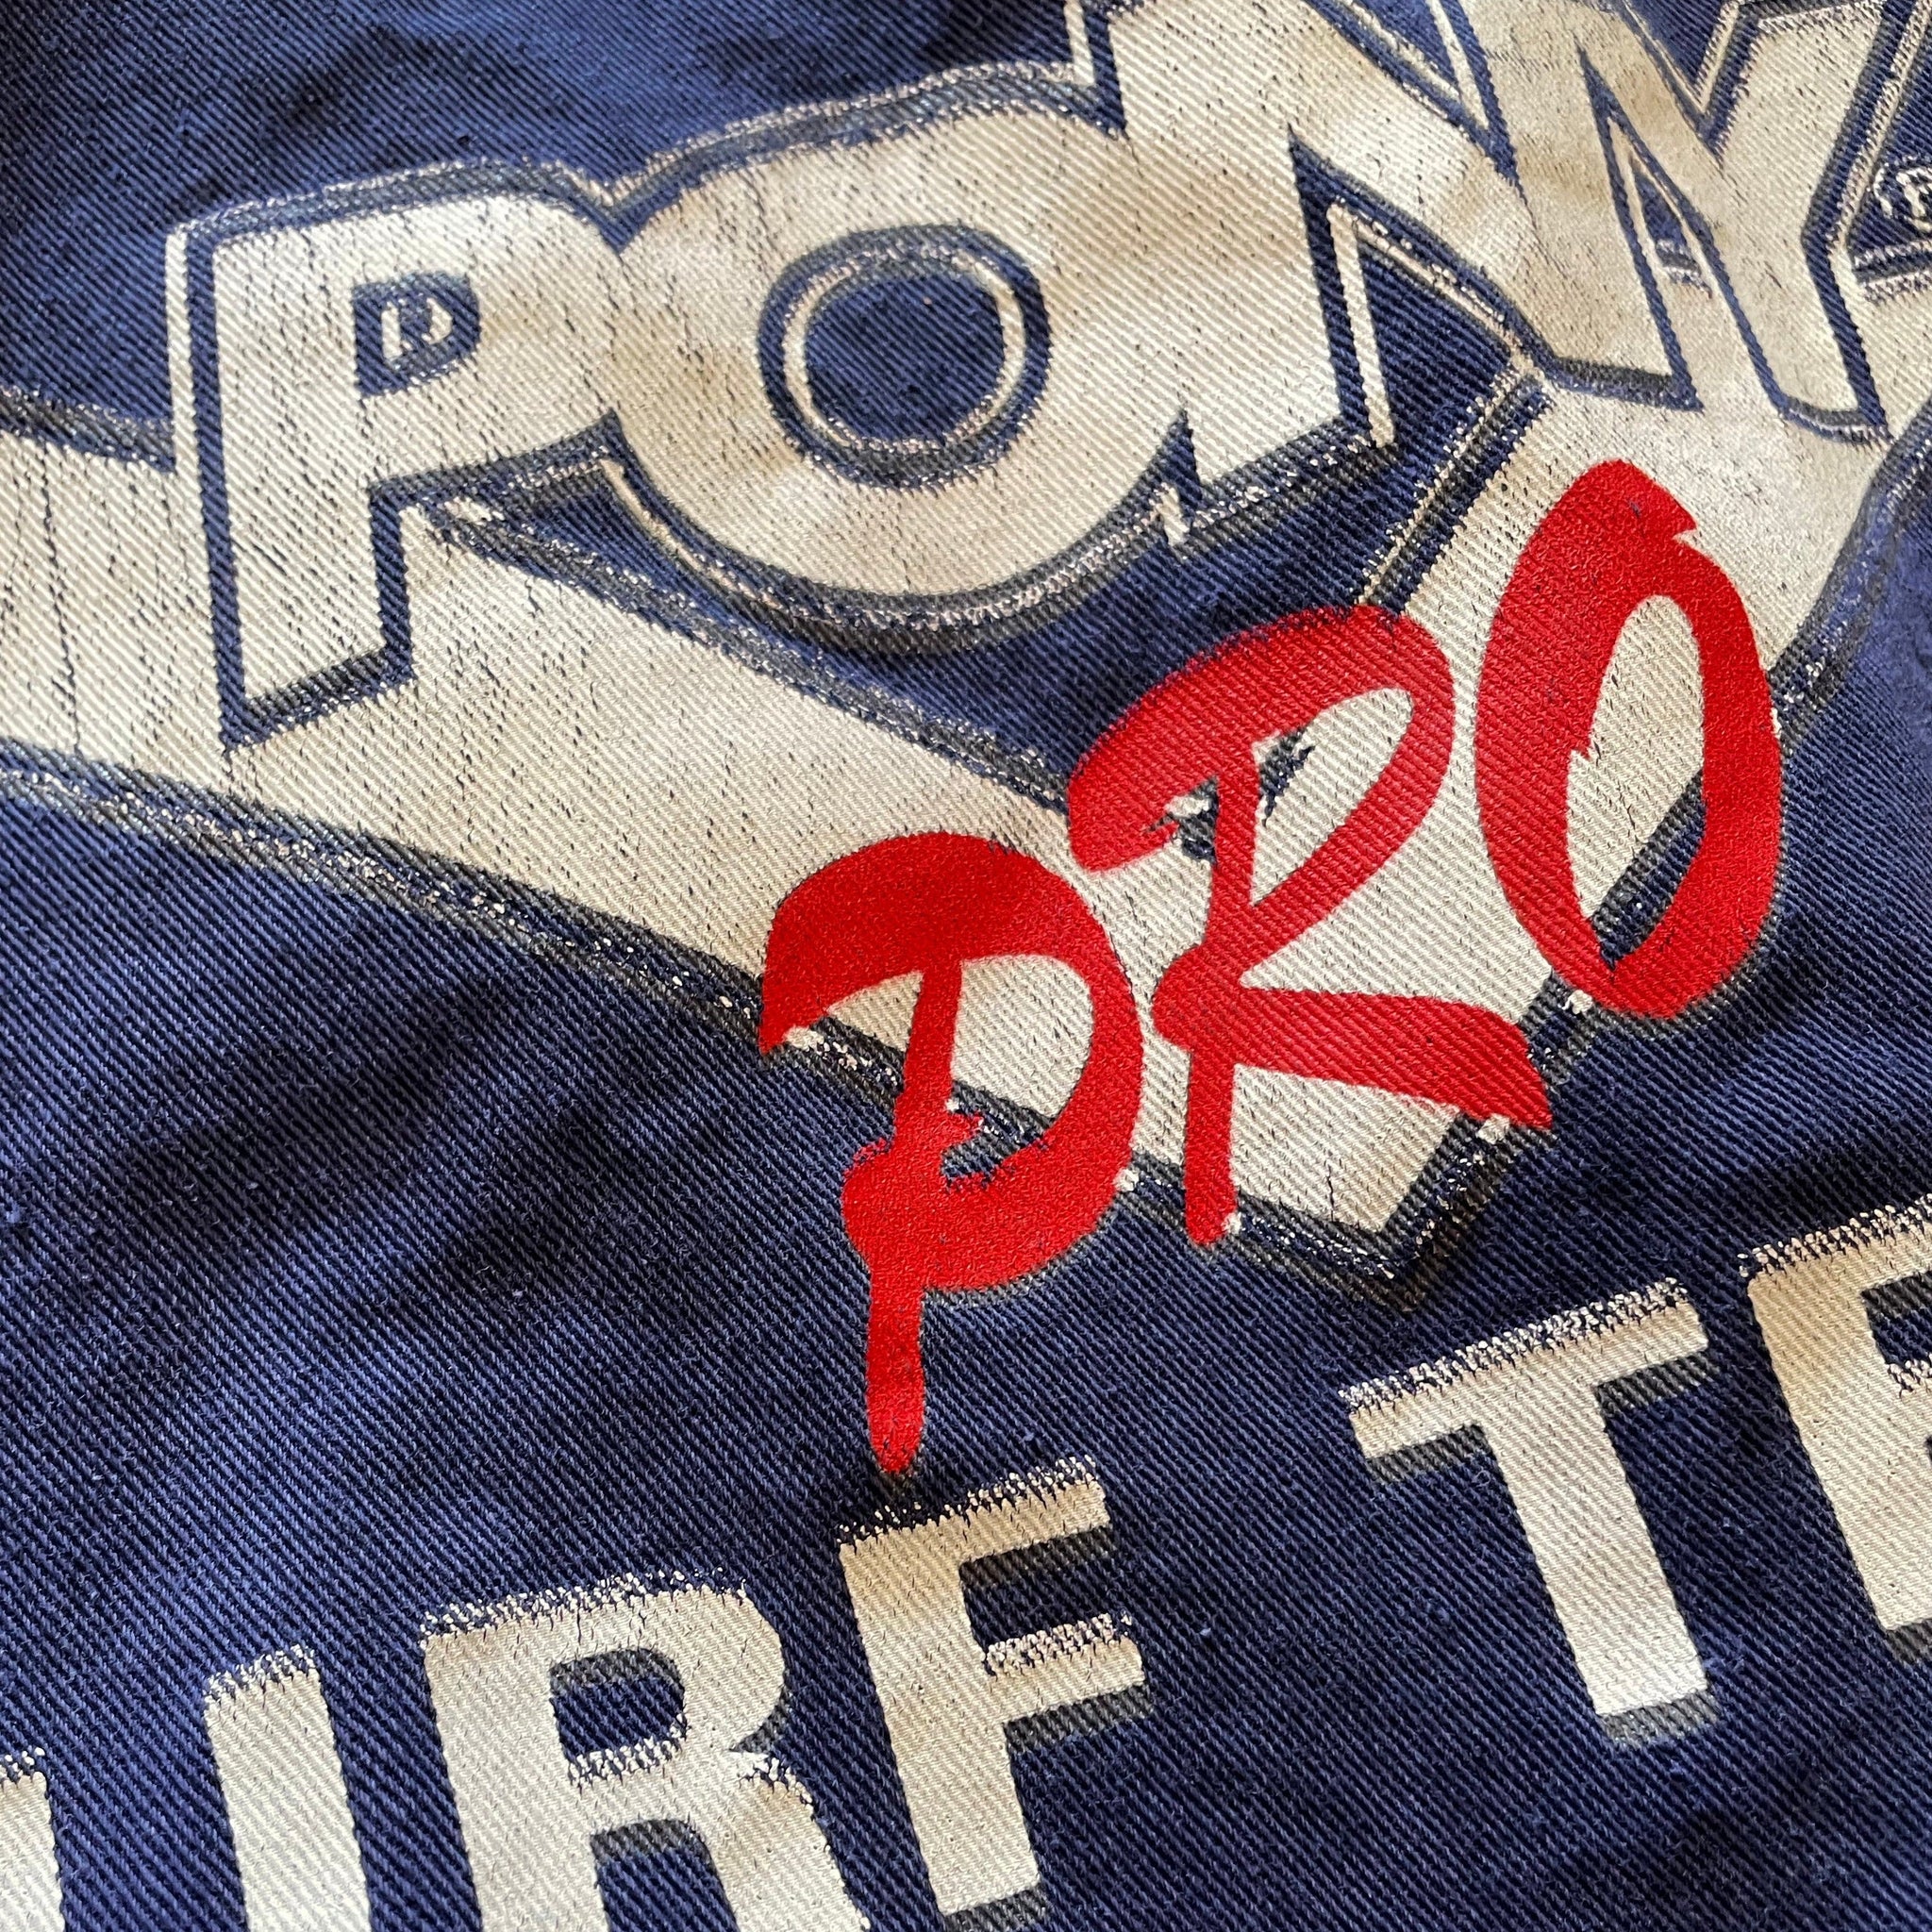 Pony Coventry City Turf Team Drill Top - L